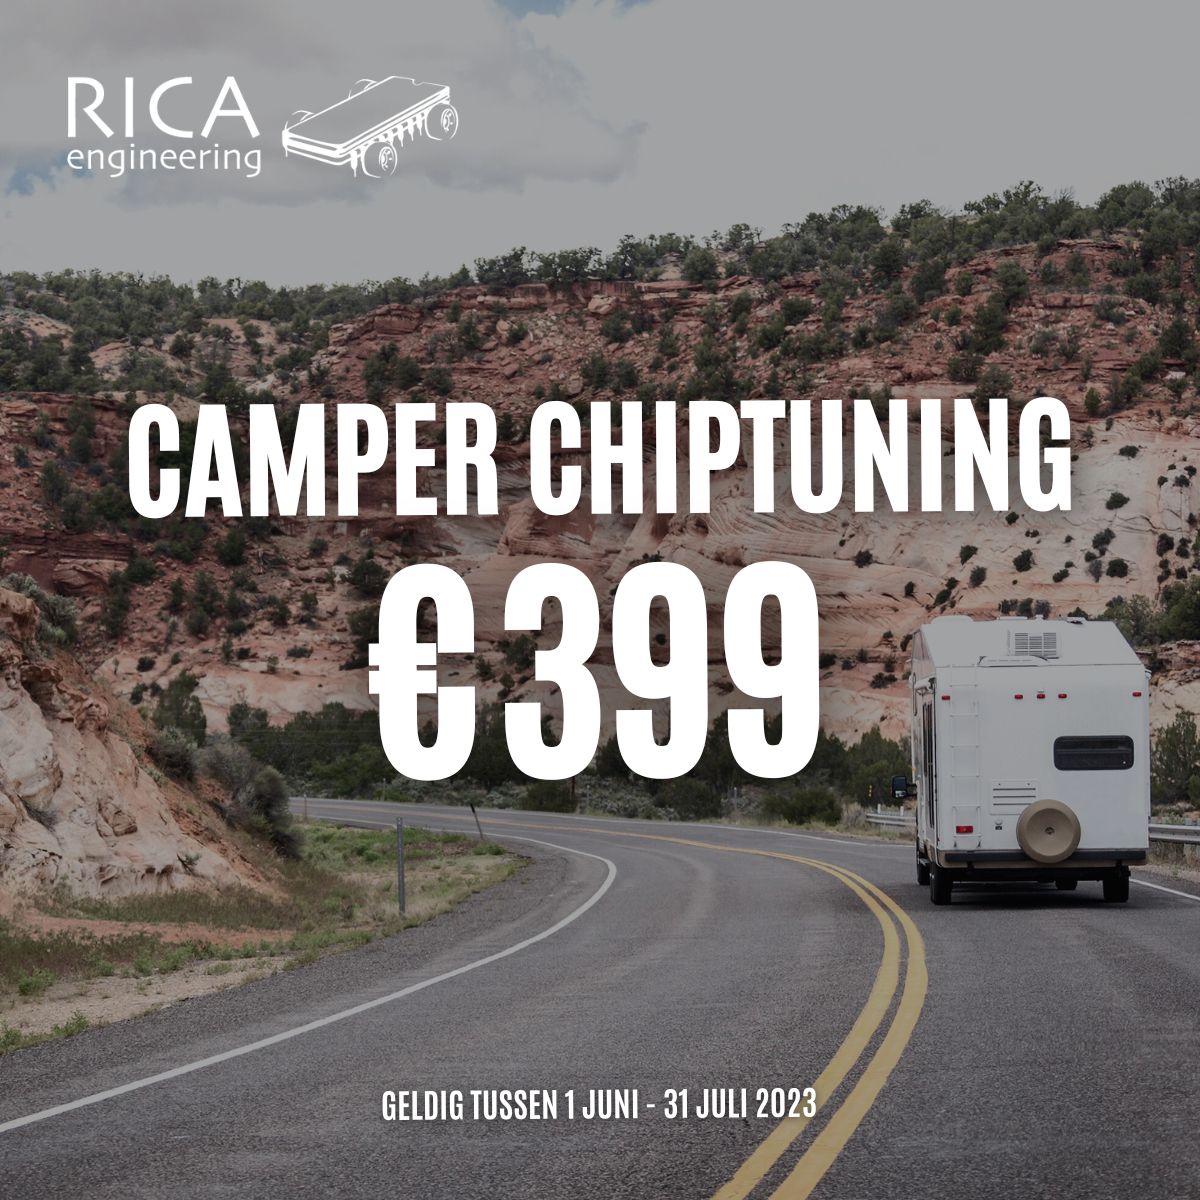 camper driving on a road. img has text overlay chiptuning deal